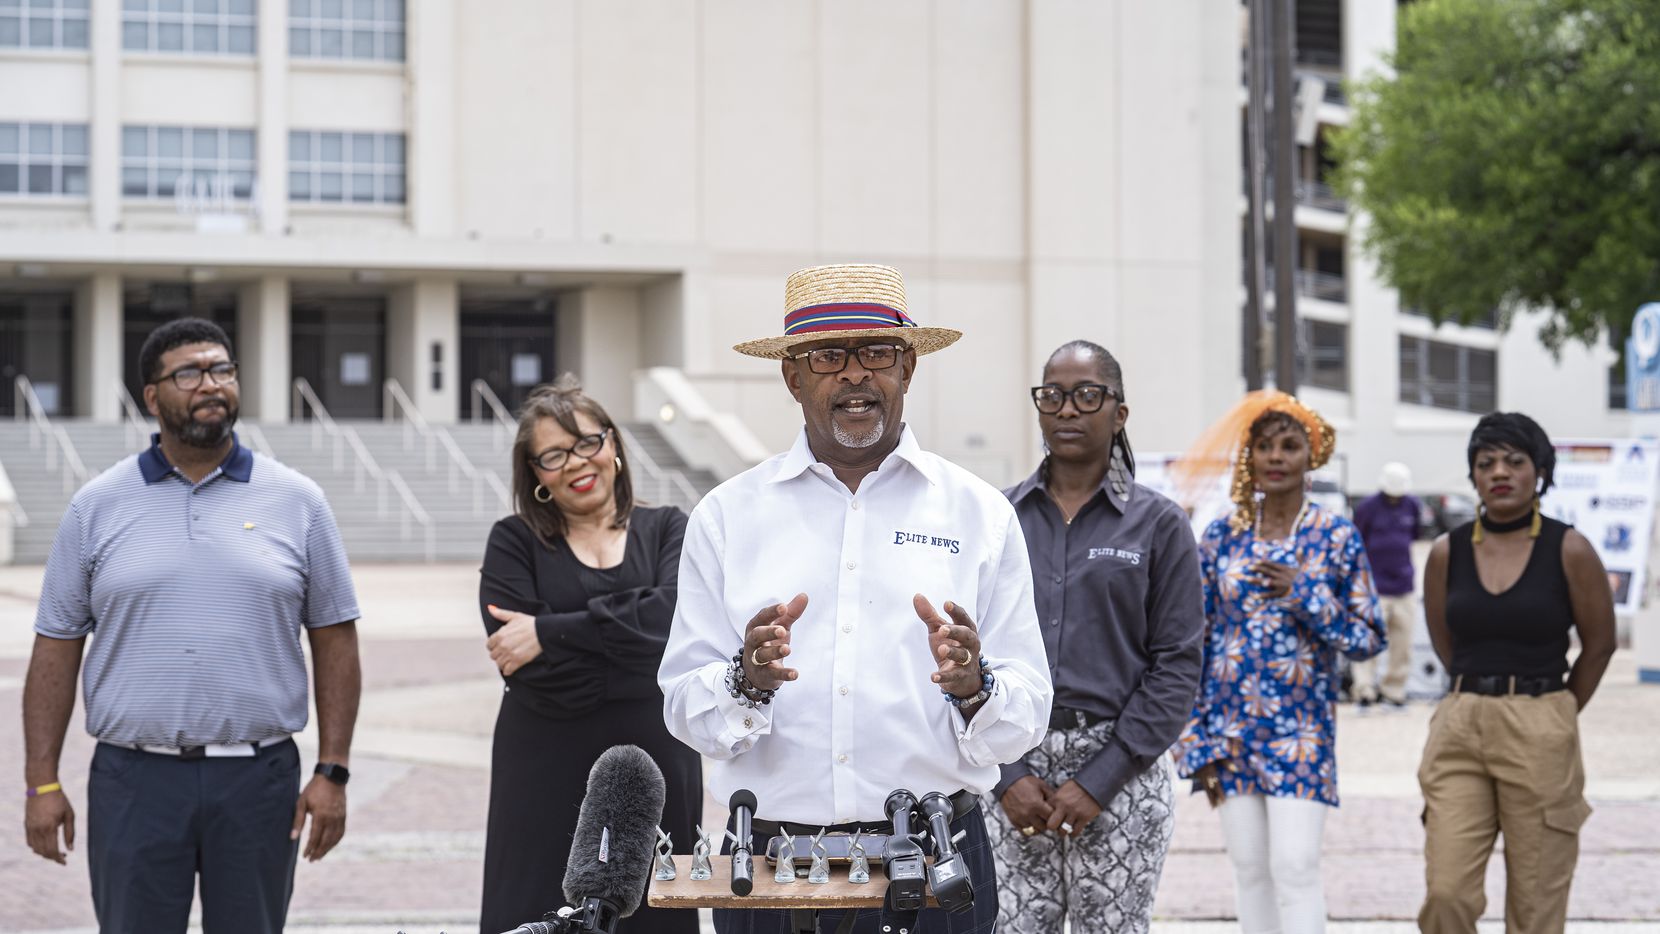 Elite News and the Blair Foundation is hosting the city's first ever Juneteenth March and Festival on June 19. Seen here is Darryl Blair, publishing editor of Elite News at a press conference Thursday at the Fair Park.